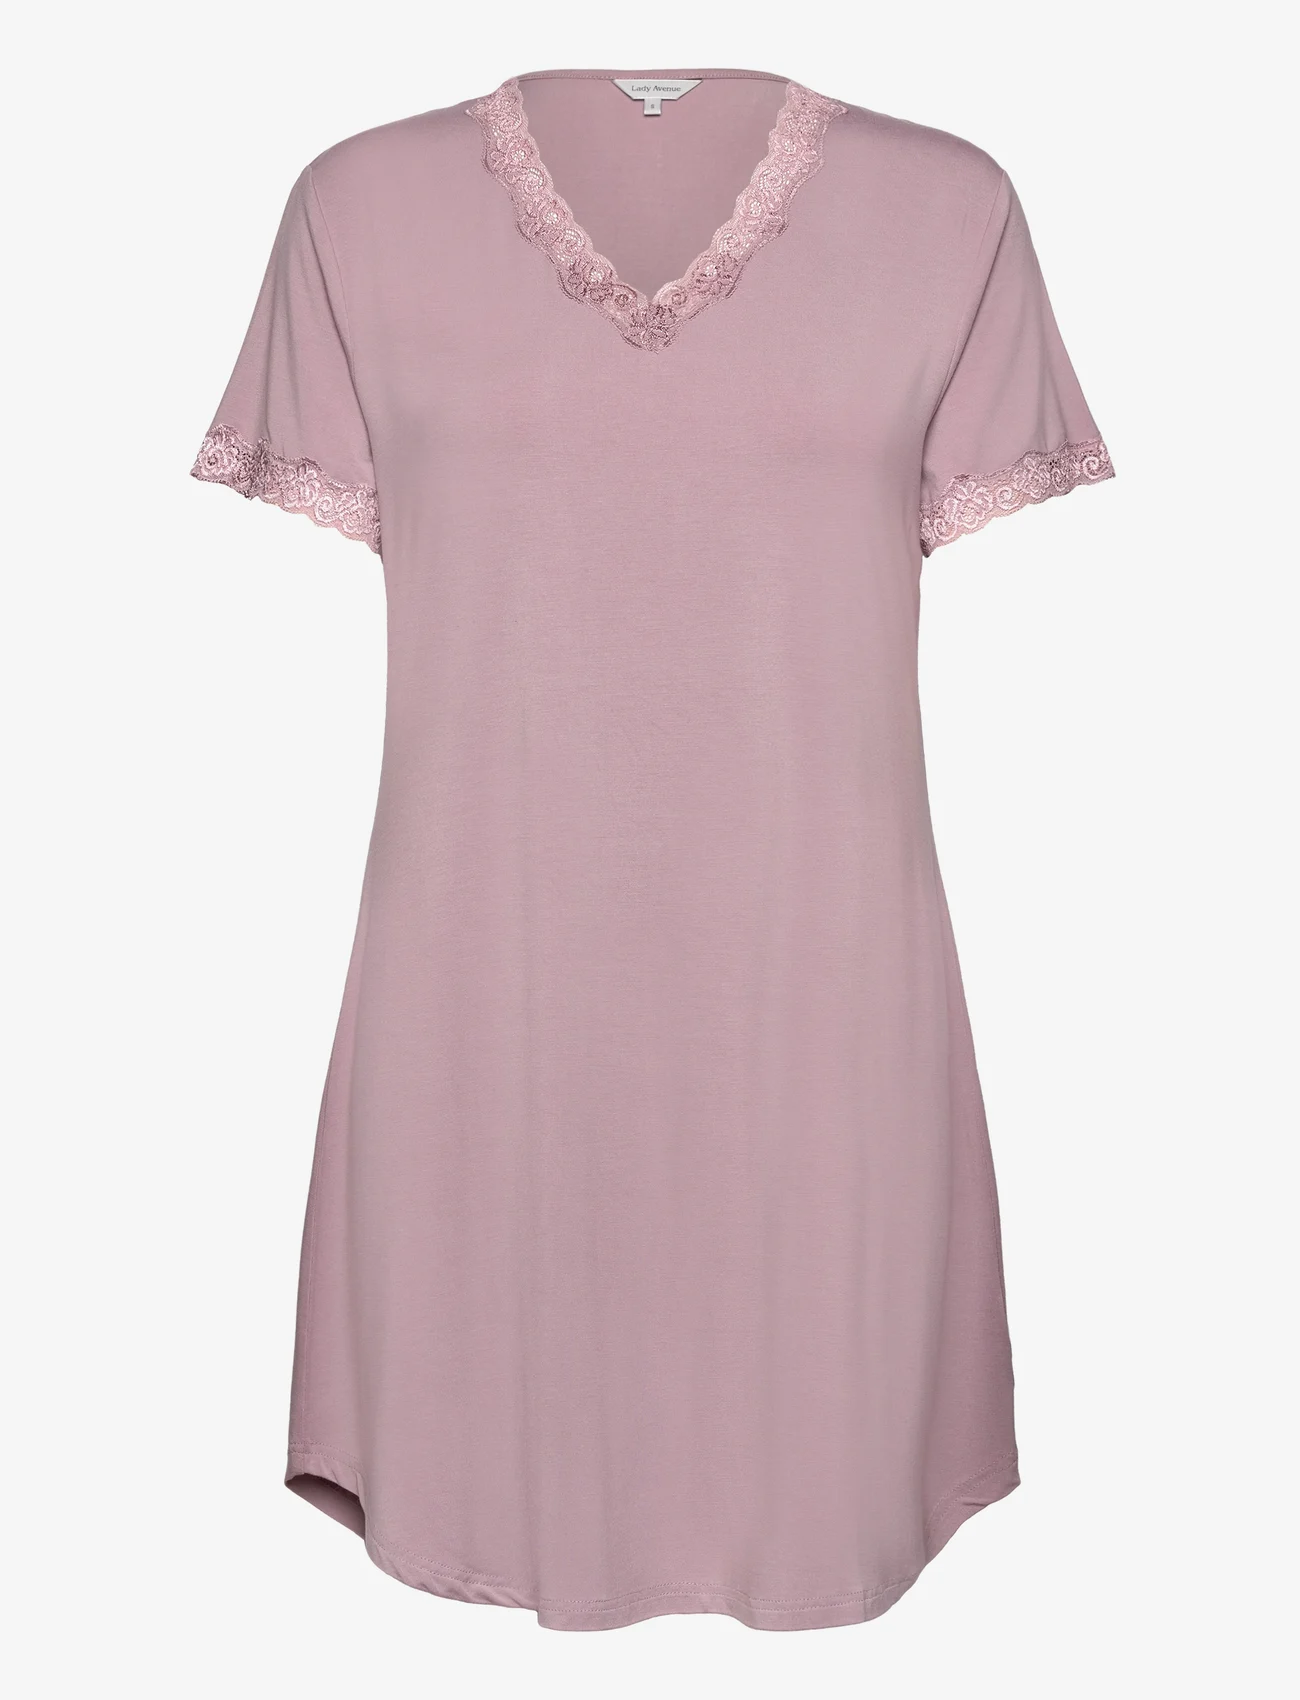 Lady Avenue - Bamboo short sleeve nightdress with - plus size - winter rose - 0